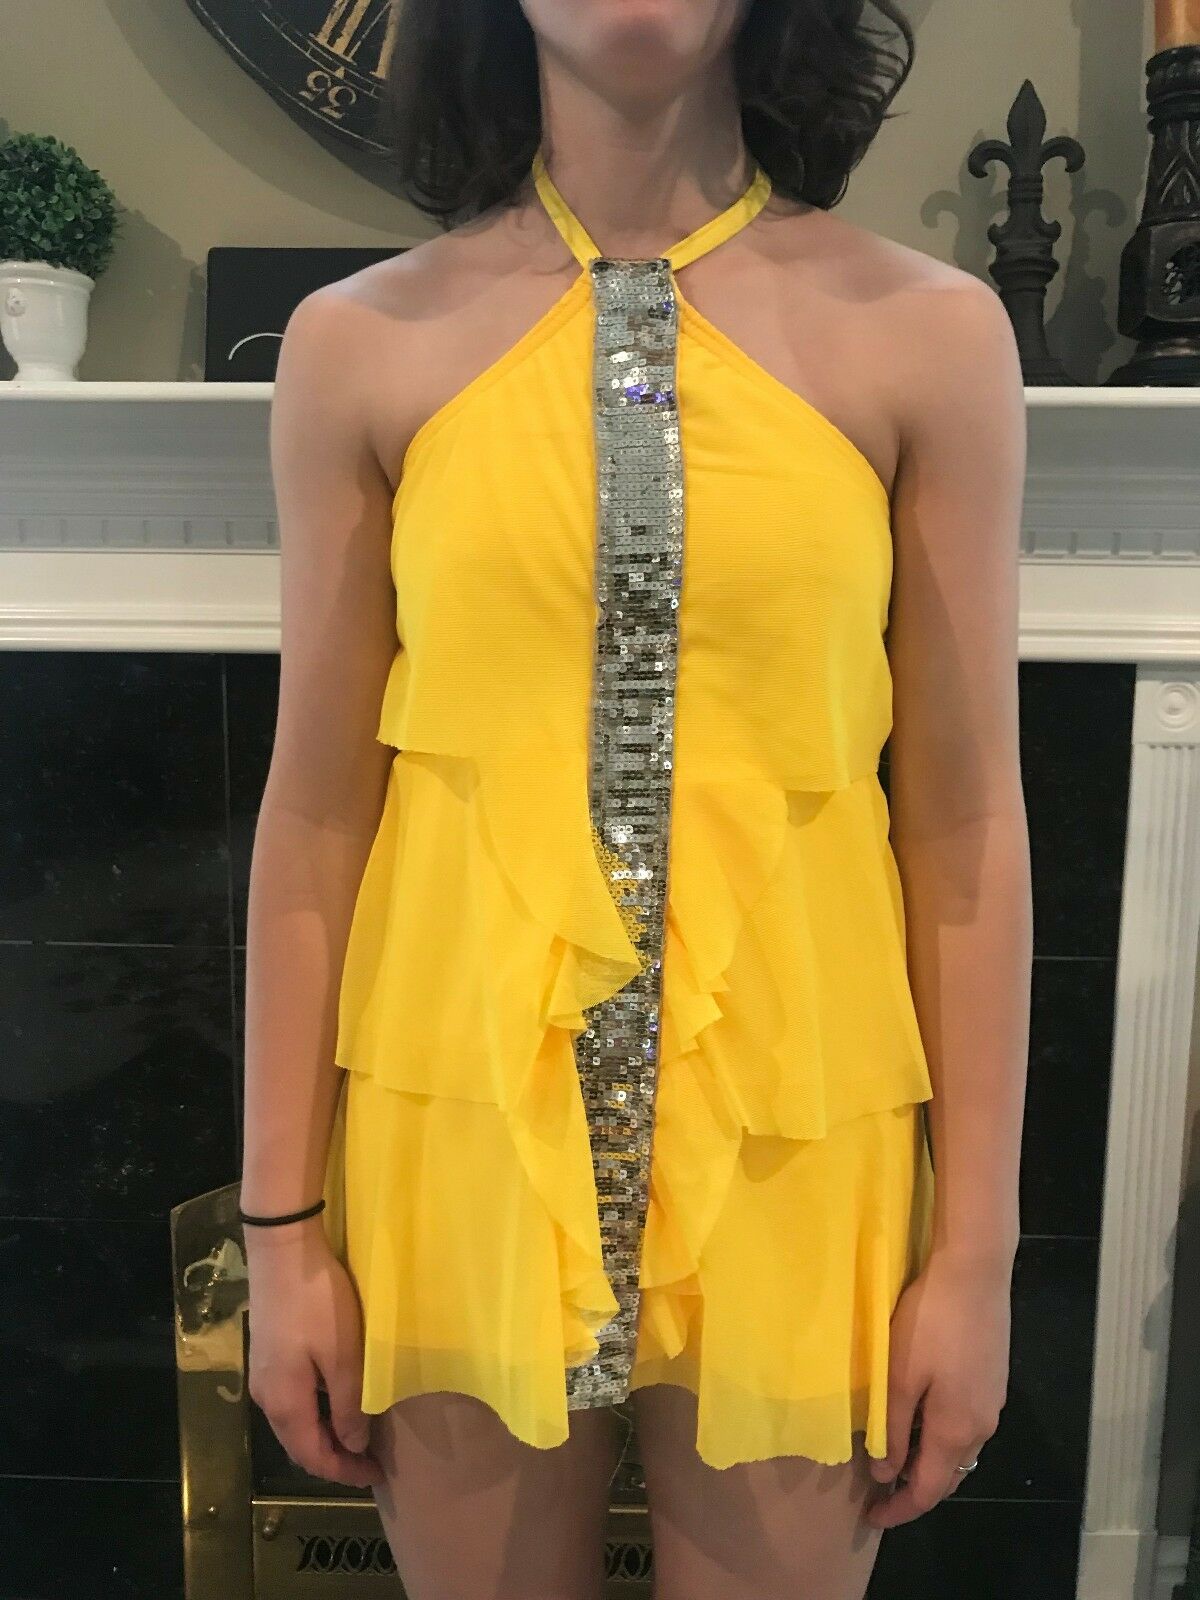 Kelle Yellow Sequined/mesh Flapper Dance Costume, Size Child Large